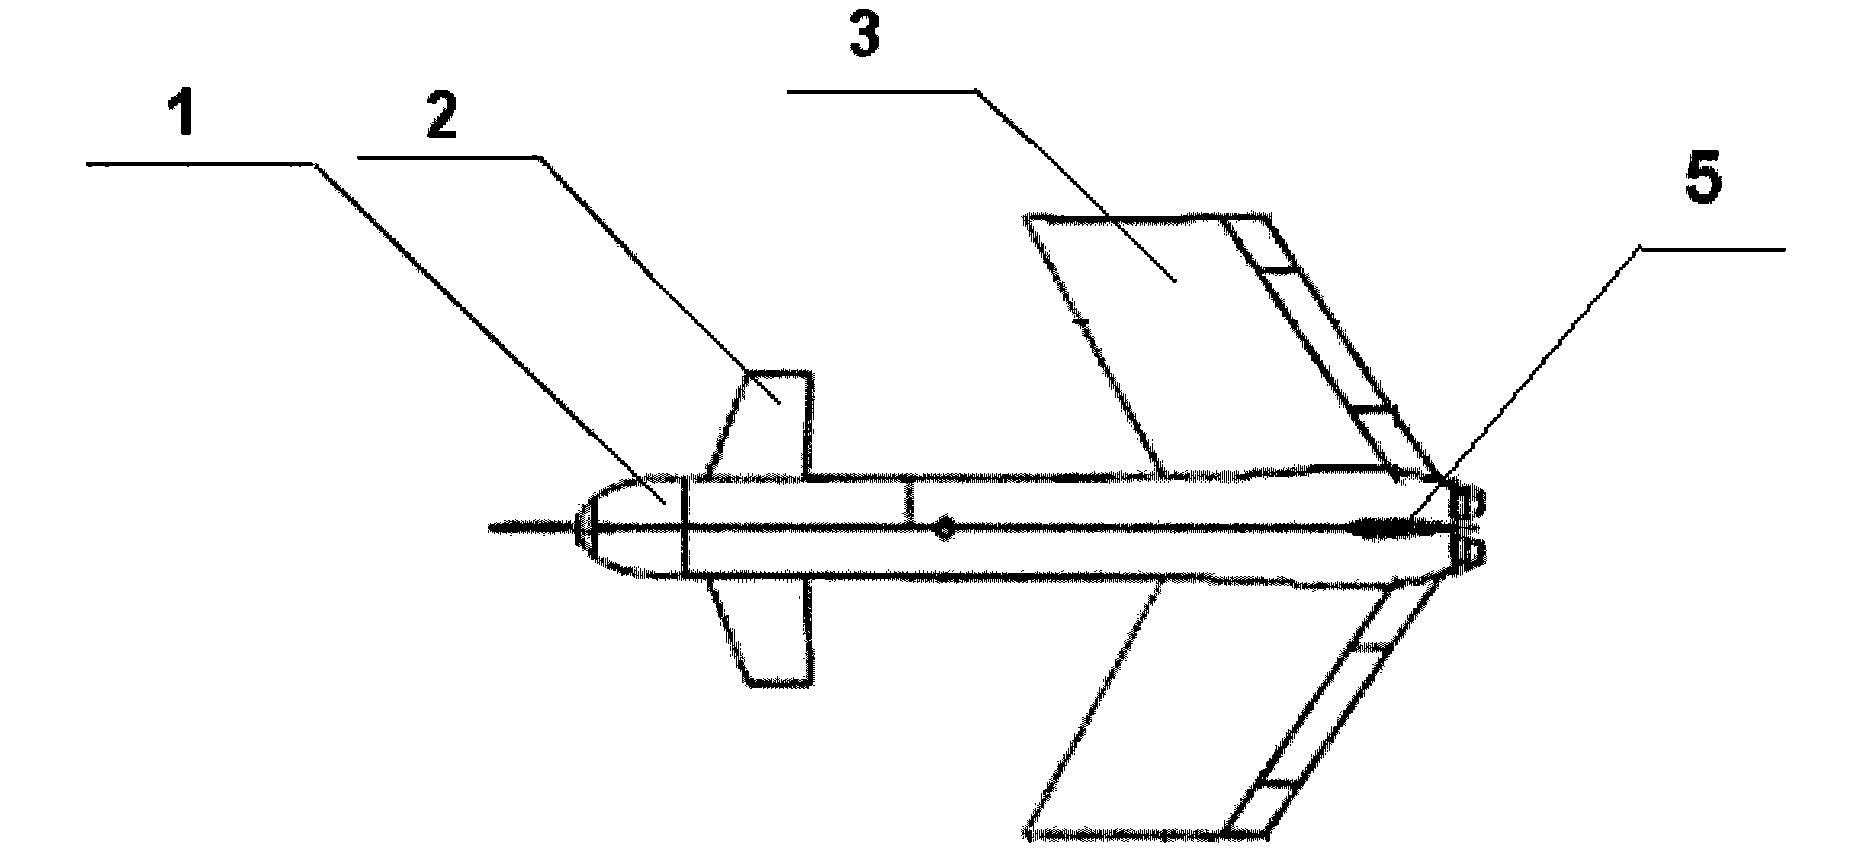 Aerodynamic layout of a canard-swept forward-swept telescoping wing with variable wing area